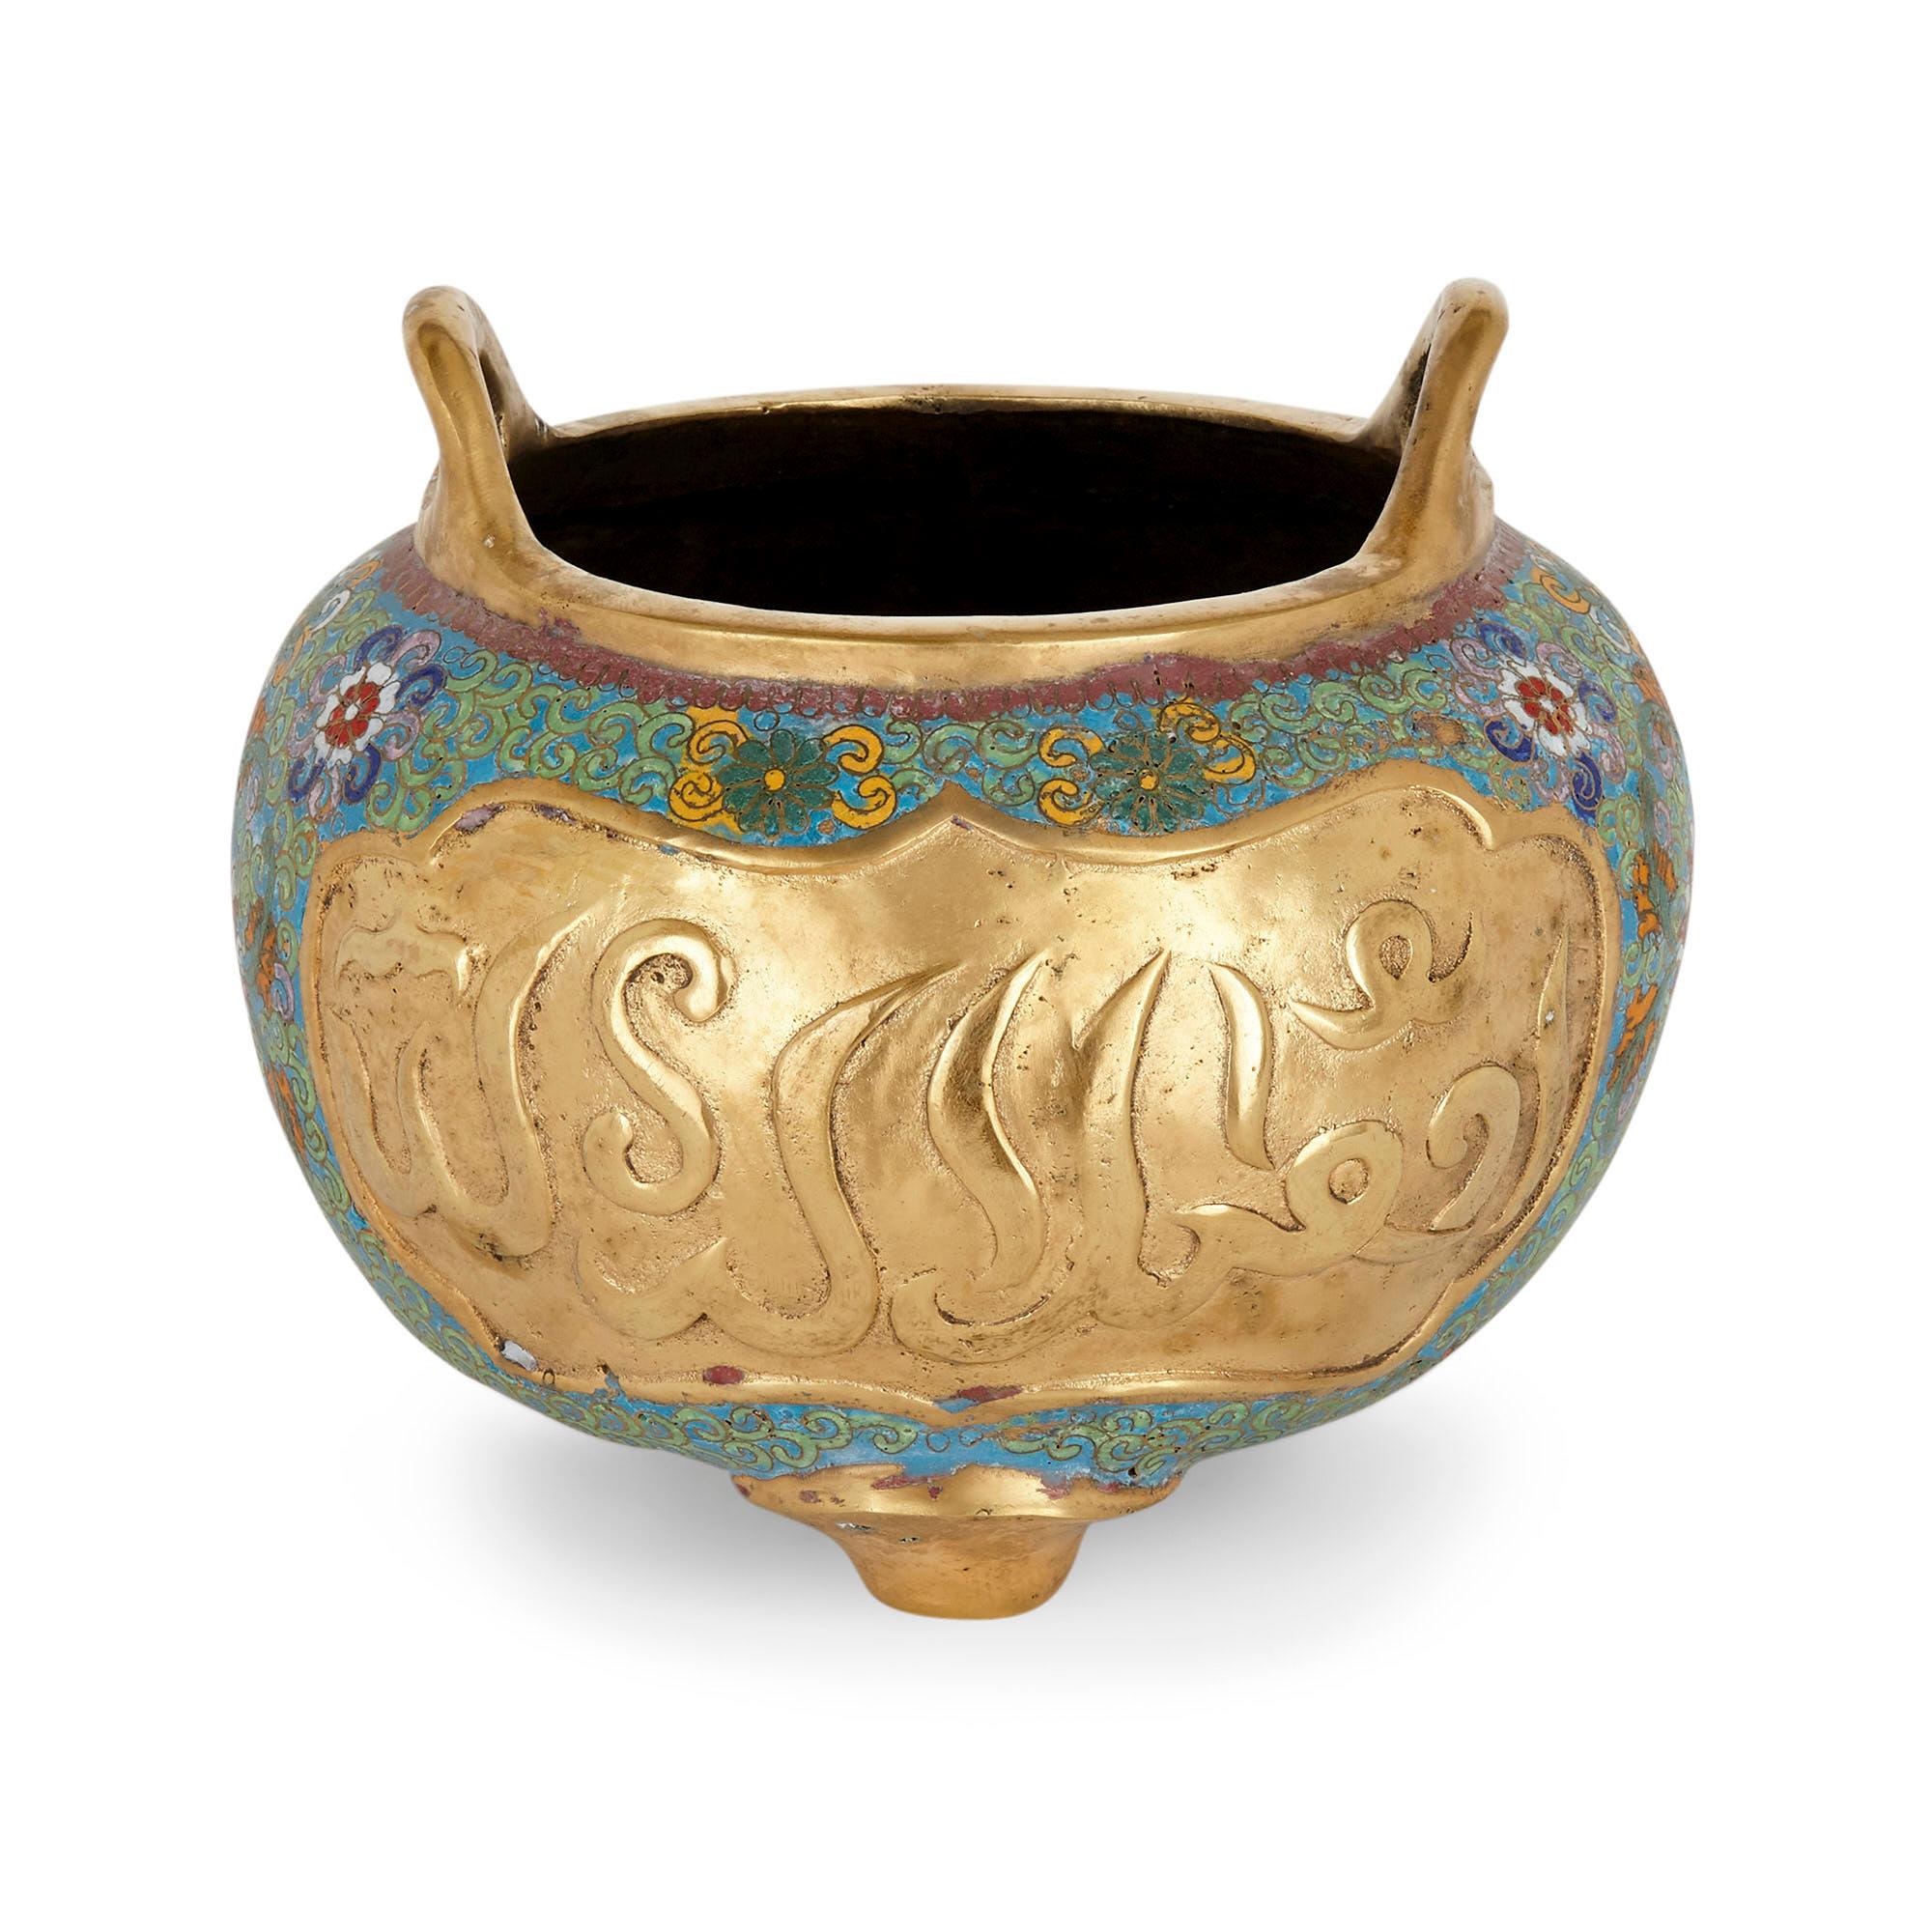 Chinese ormolu and cloisonné enamel vase for the Islamic Market
Chinese, early 20th century
Dimensions: Height 20cm, diameter 23cm

Crafted in China, this fine ormolu and cloisonné enamel bowl was intended for export to Islamic markets. Sitting